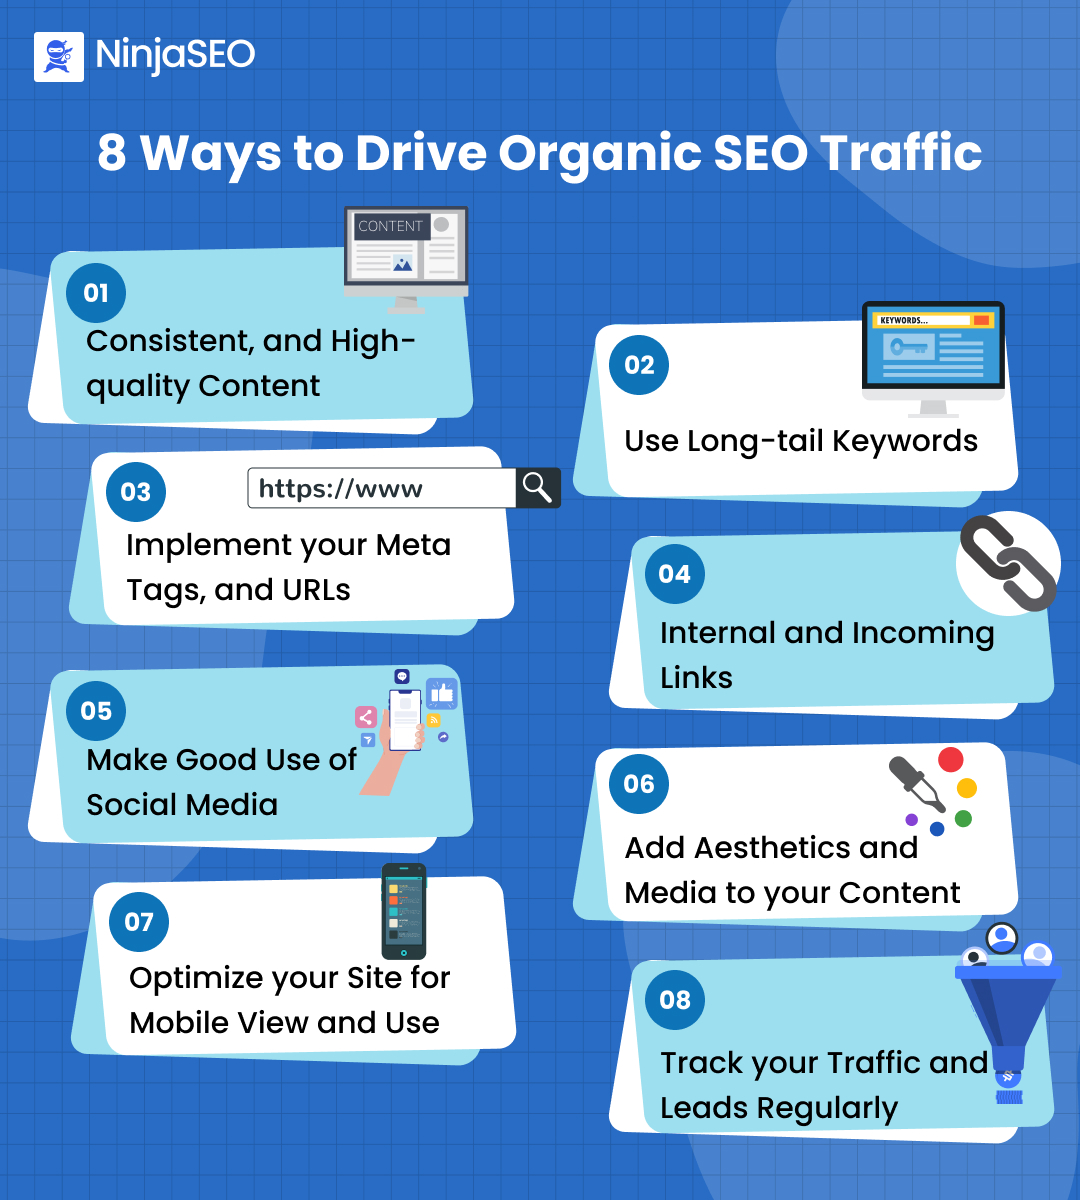 Want to ensure your website is optimized for search engines and user experience? Check out these 8 tips for driving organic SEO traffic and improving your online presence.

Visit: lnkd.in/gYw54x2a

#SEO #OrganicSEO #OnPageSEO #NinjaSEO